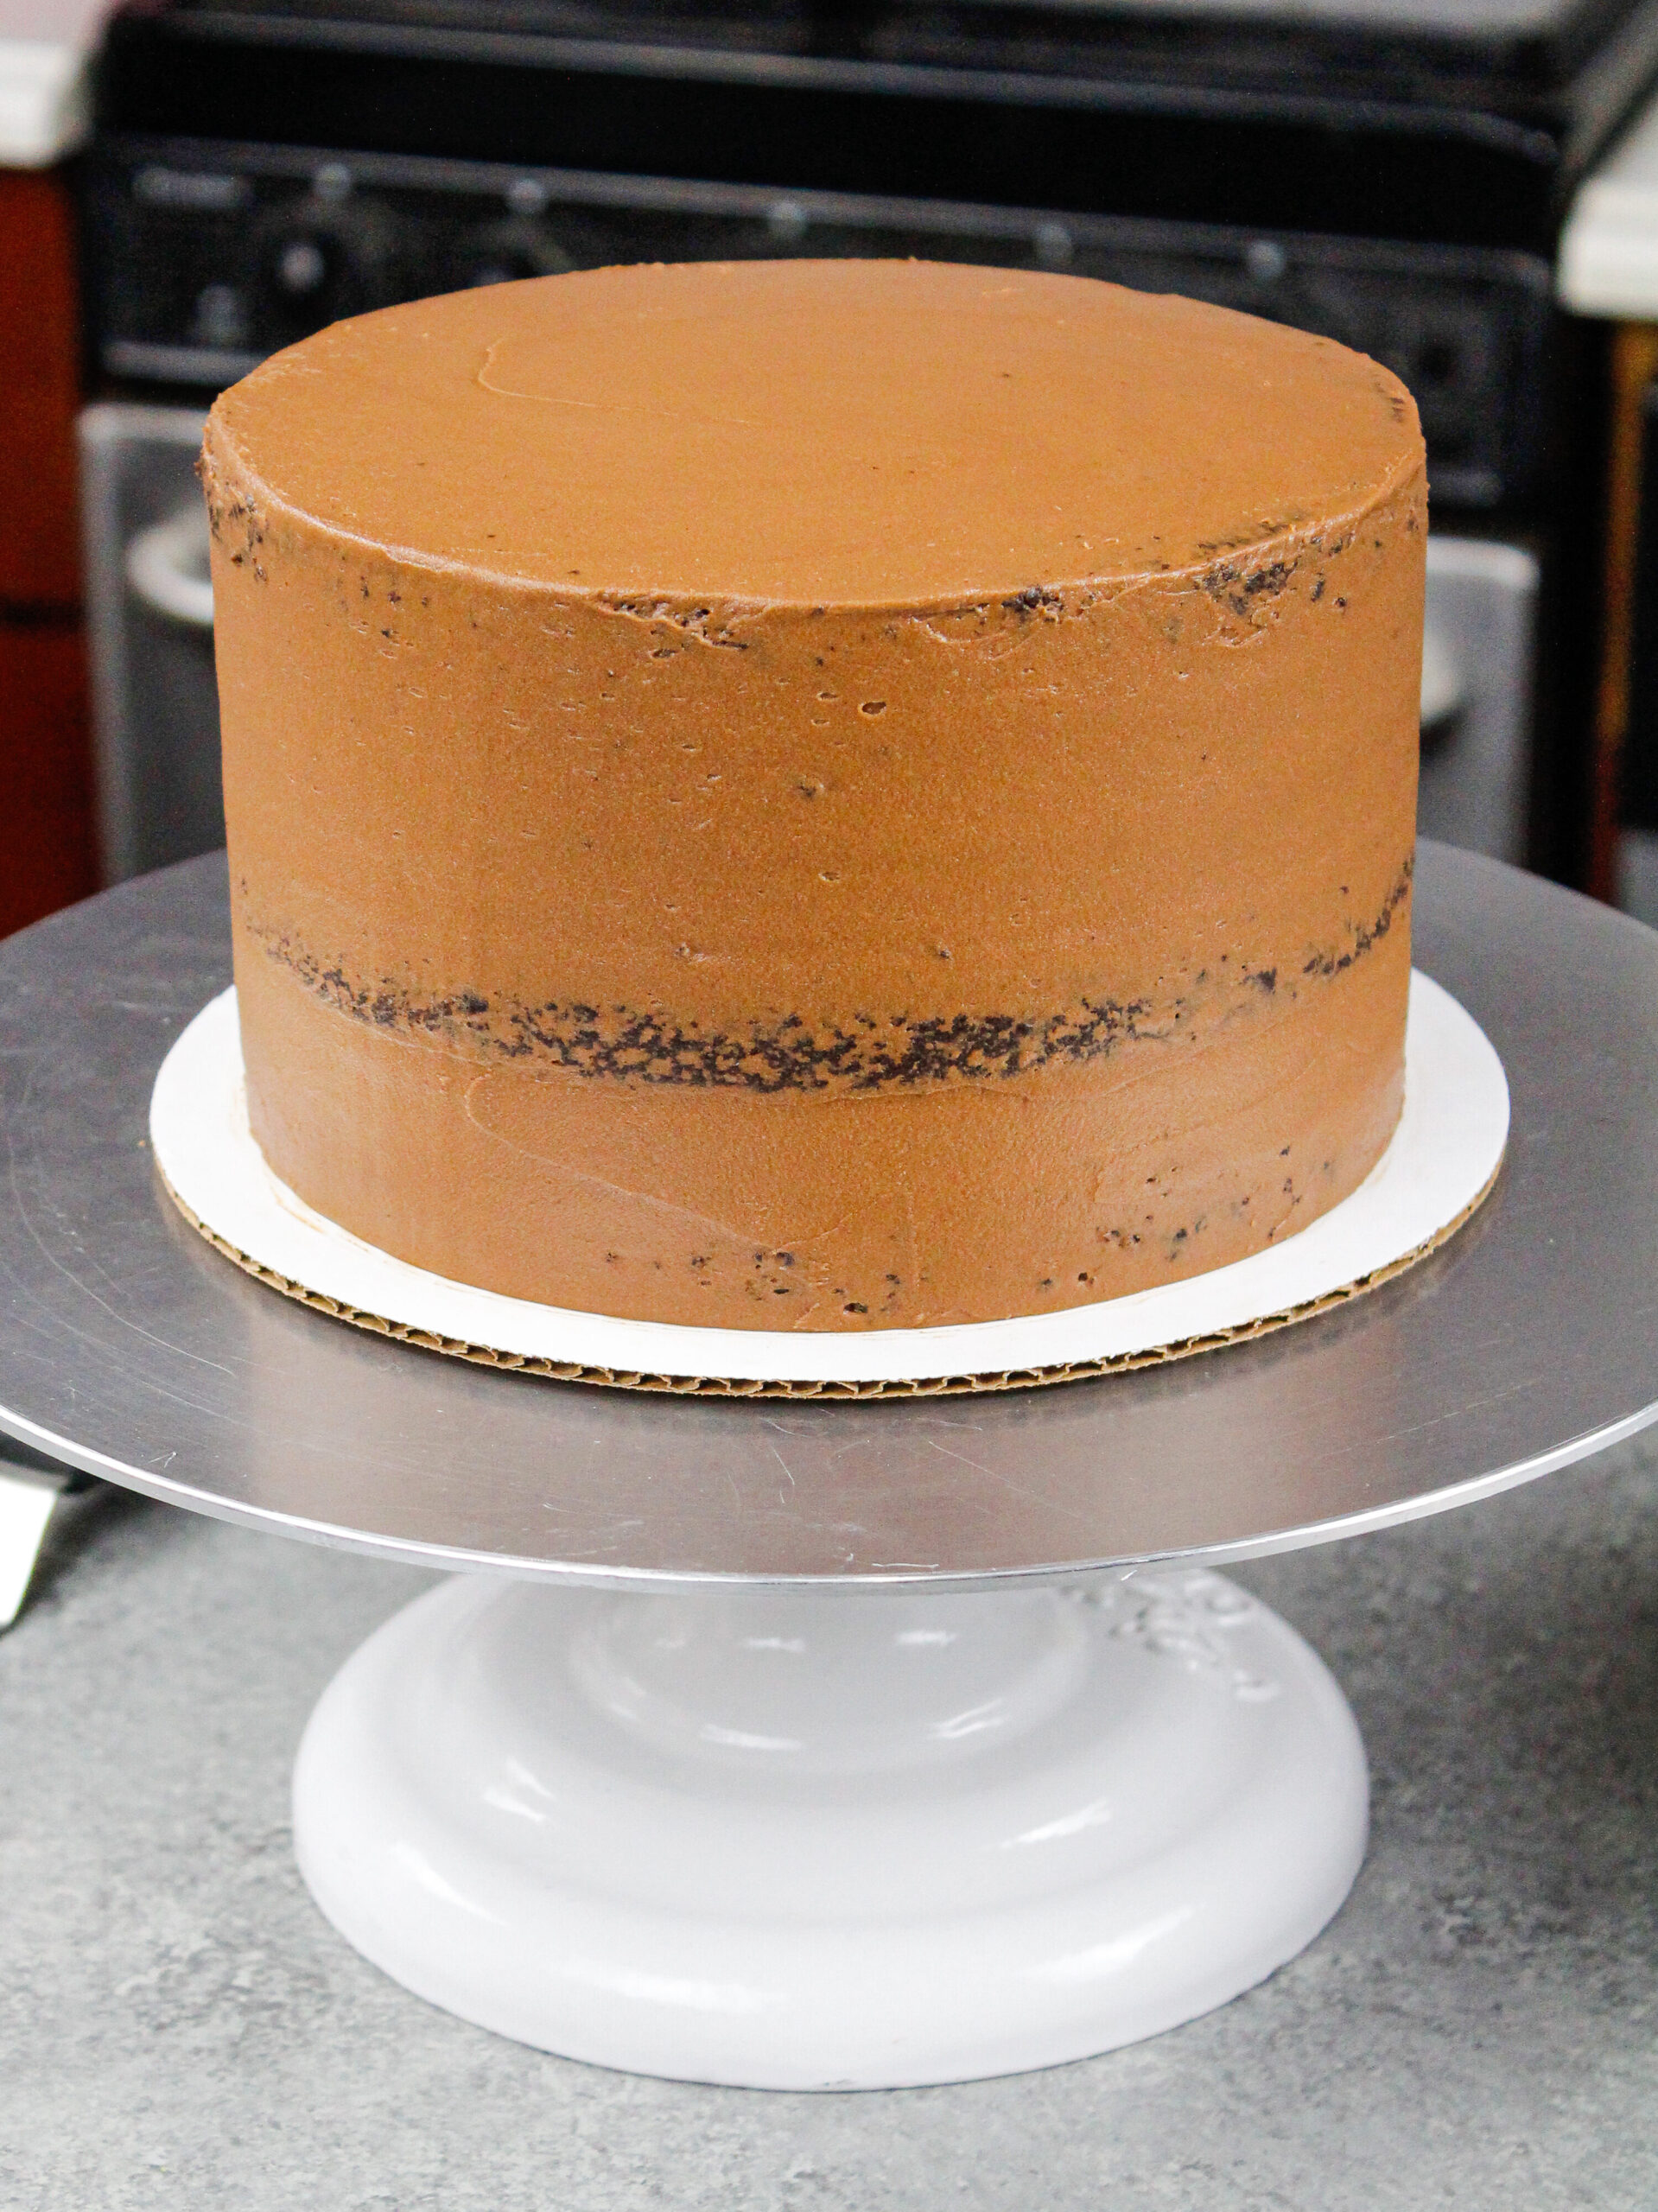 image of a chocolate cake that's been crumb coated and chilled and is ready for its second layer of chocolate buttercream frosting